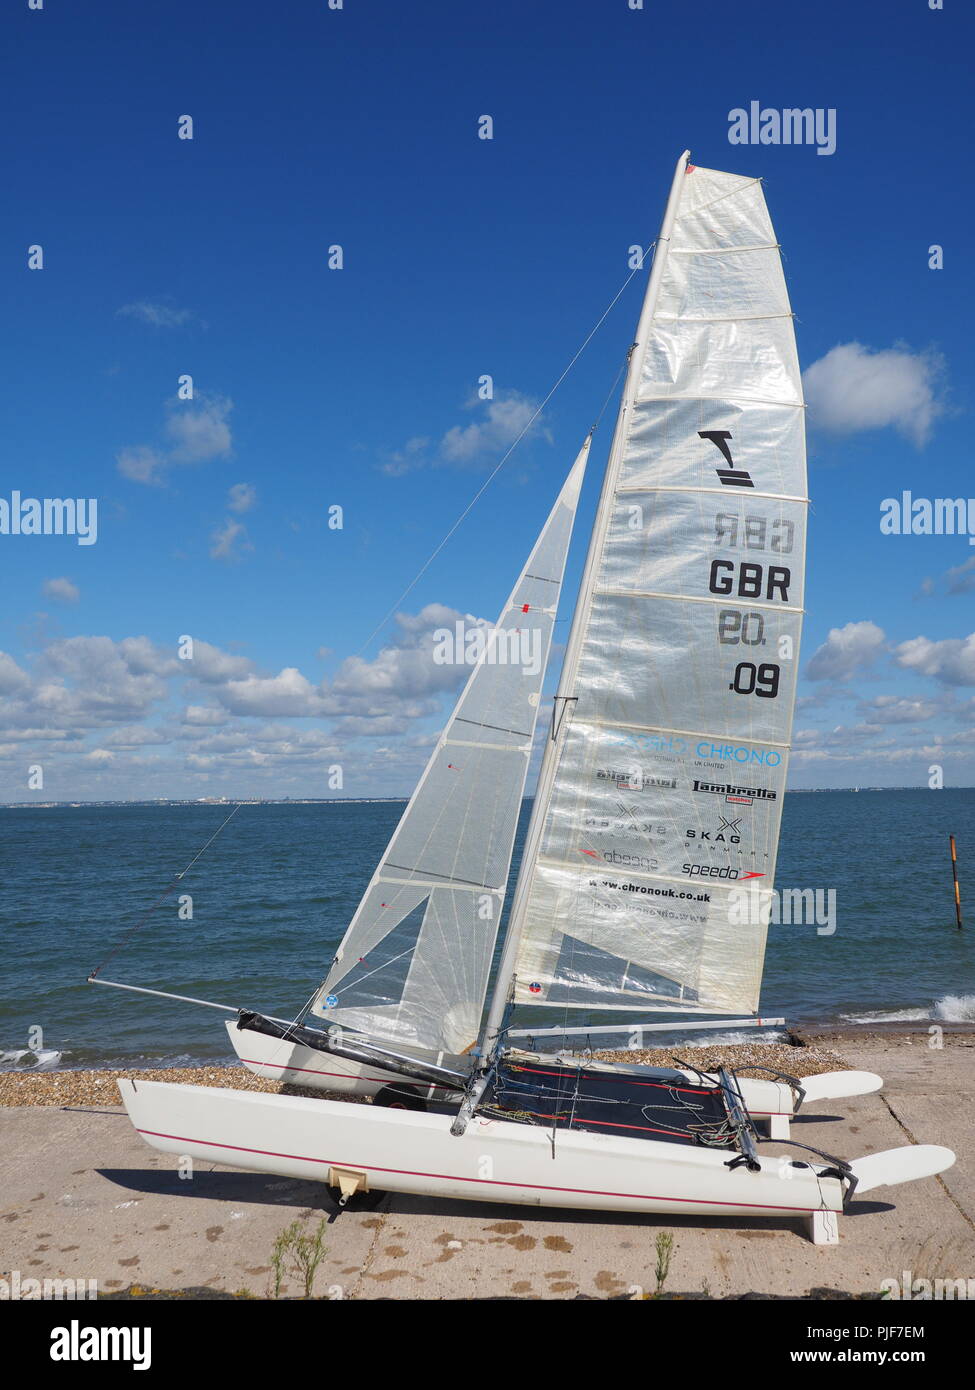 Sheerness, Kent, UK. 7th Sep, 2018. UK Weather: a sunny day with blues skies in Sheerness, Kent. A competitor sailing a Tornado class catamaran arrives for the 60th Round the Isle Of Sheppey Race, which takes place this weekend. The race is organised by the Isle Of Sheppey Sailing Club and is open to sailing dinghies, catamarans and sailboards. Around 100 craft are expected to take part in the 40-mile circumnavigation of the island on Sunday. Credit: James Bell/Alamy Live News Stock Photo